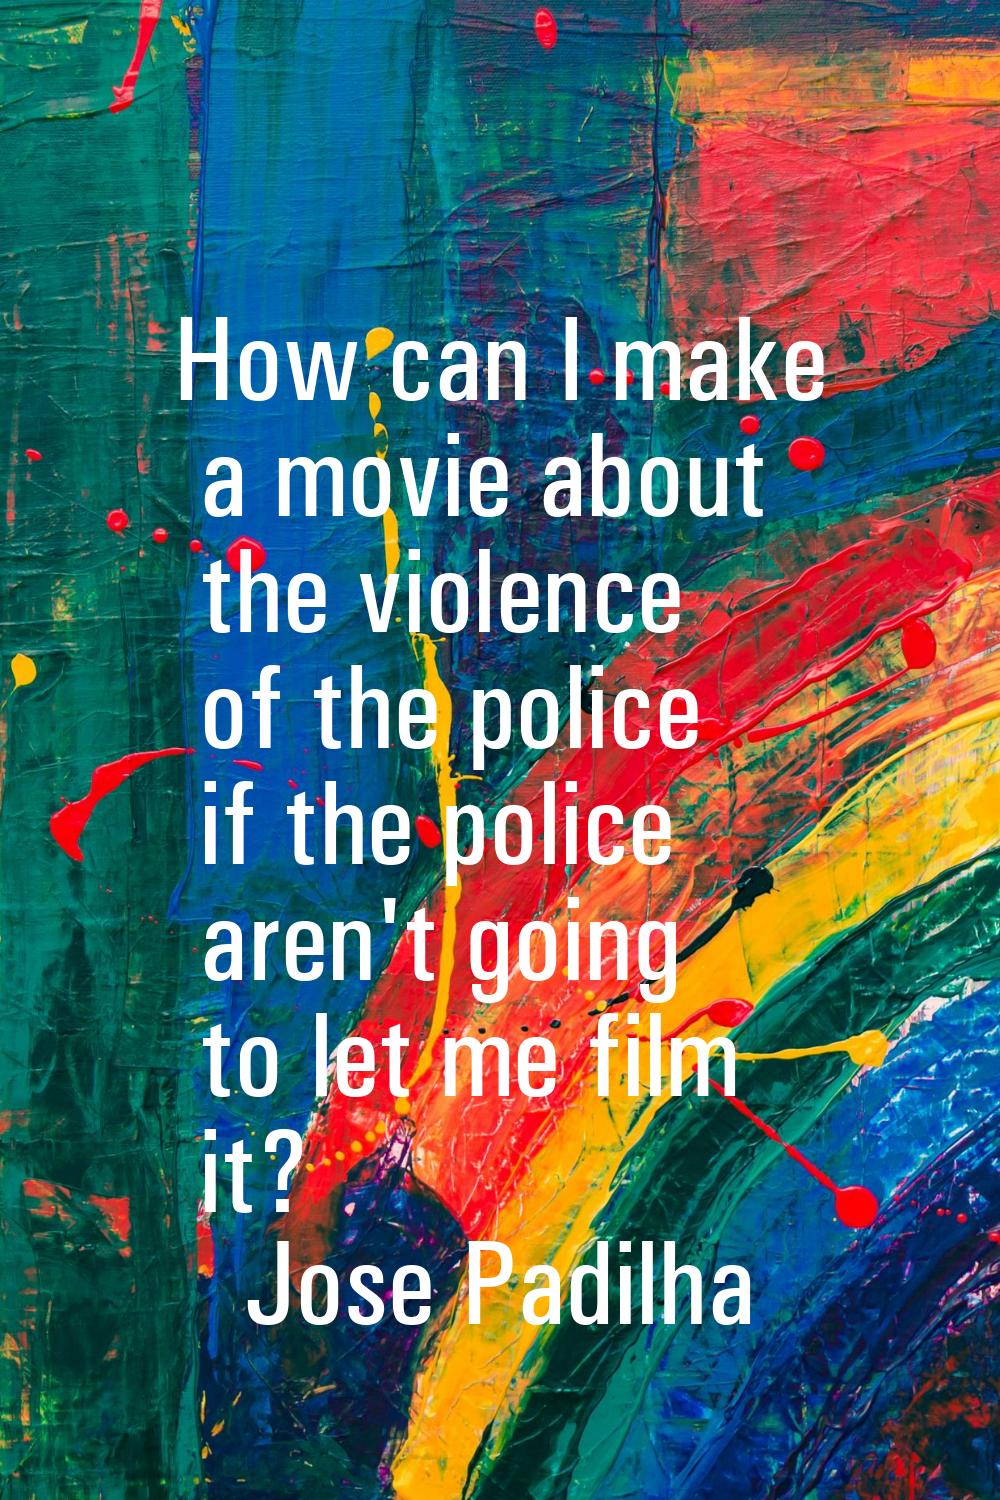 How can I make a movie about the violence of the police if the police aren't going to let me film i